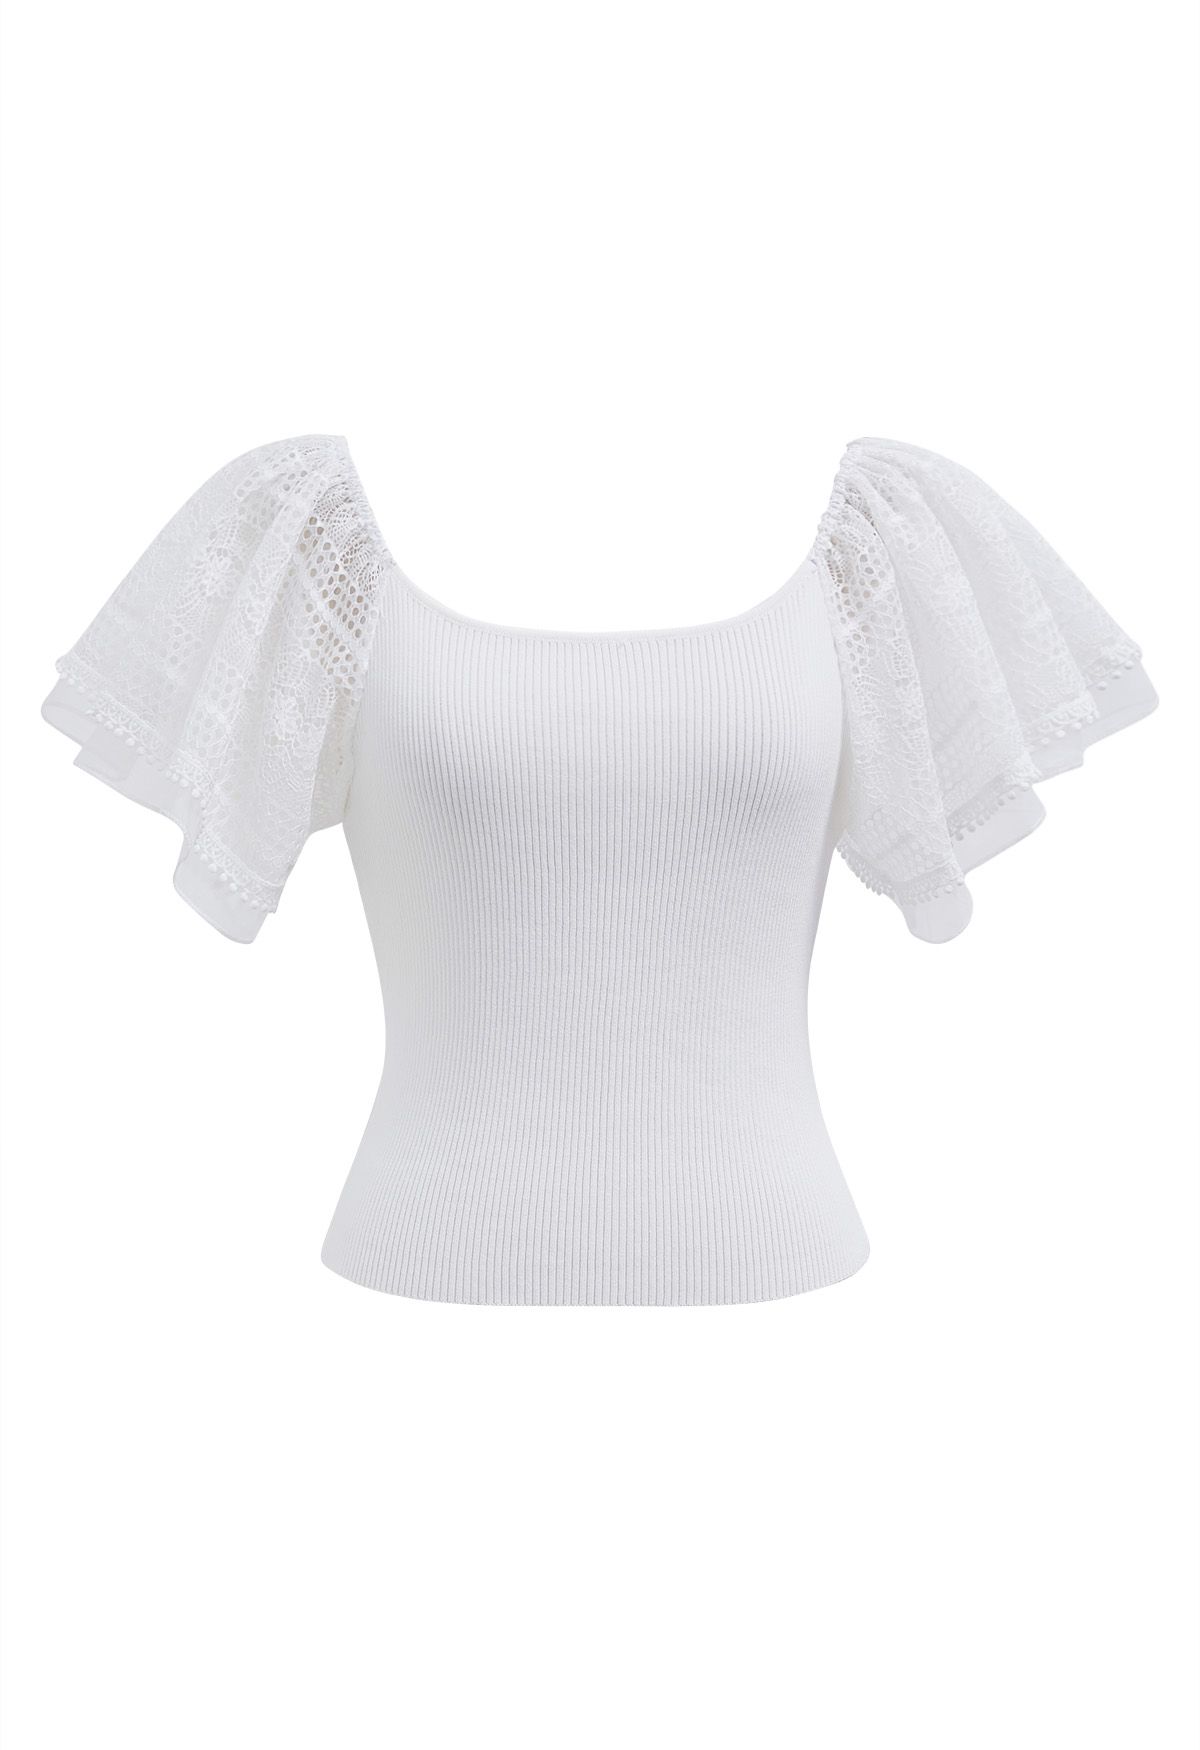 Cutwork Lace Flutter Sleeves Spliced Knit Top in White